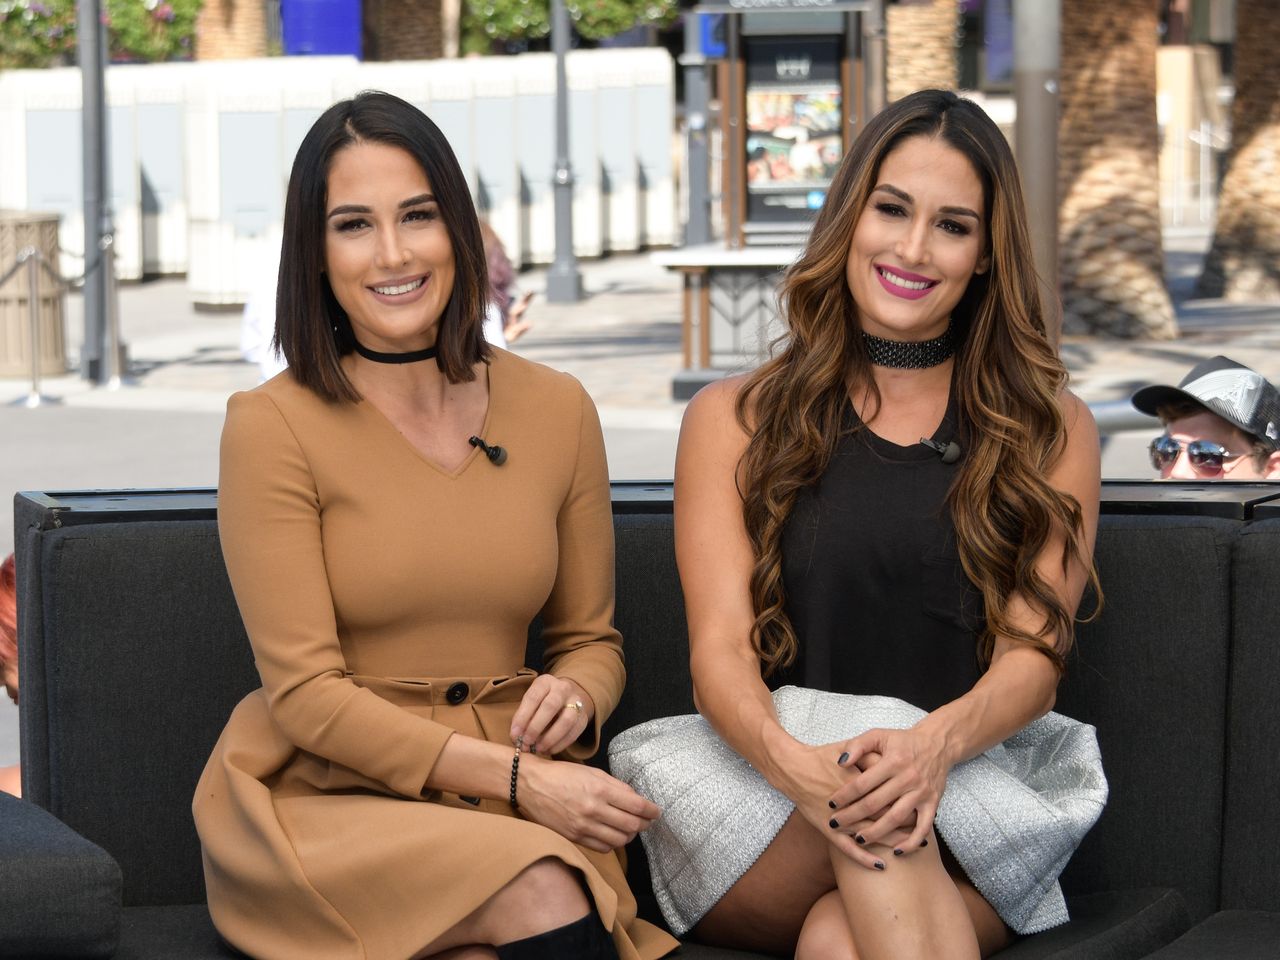 Nikki and Brie Bella during their visit to "Extra" at Universal Studios Hollywood on October 3, 2016 in Universal City, California. | Source: Getty Images